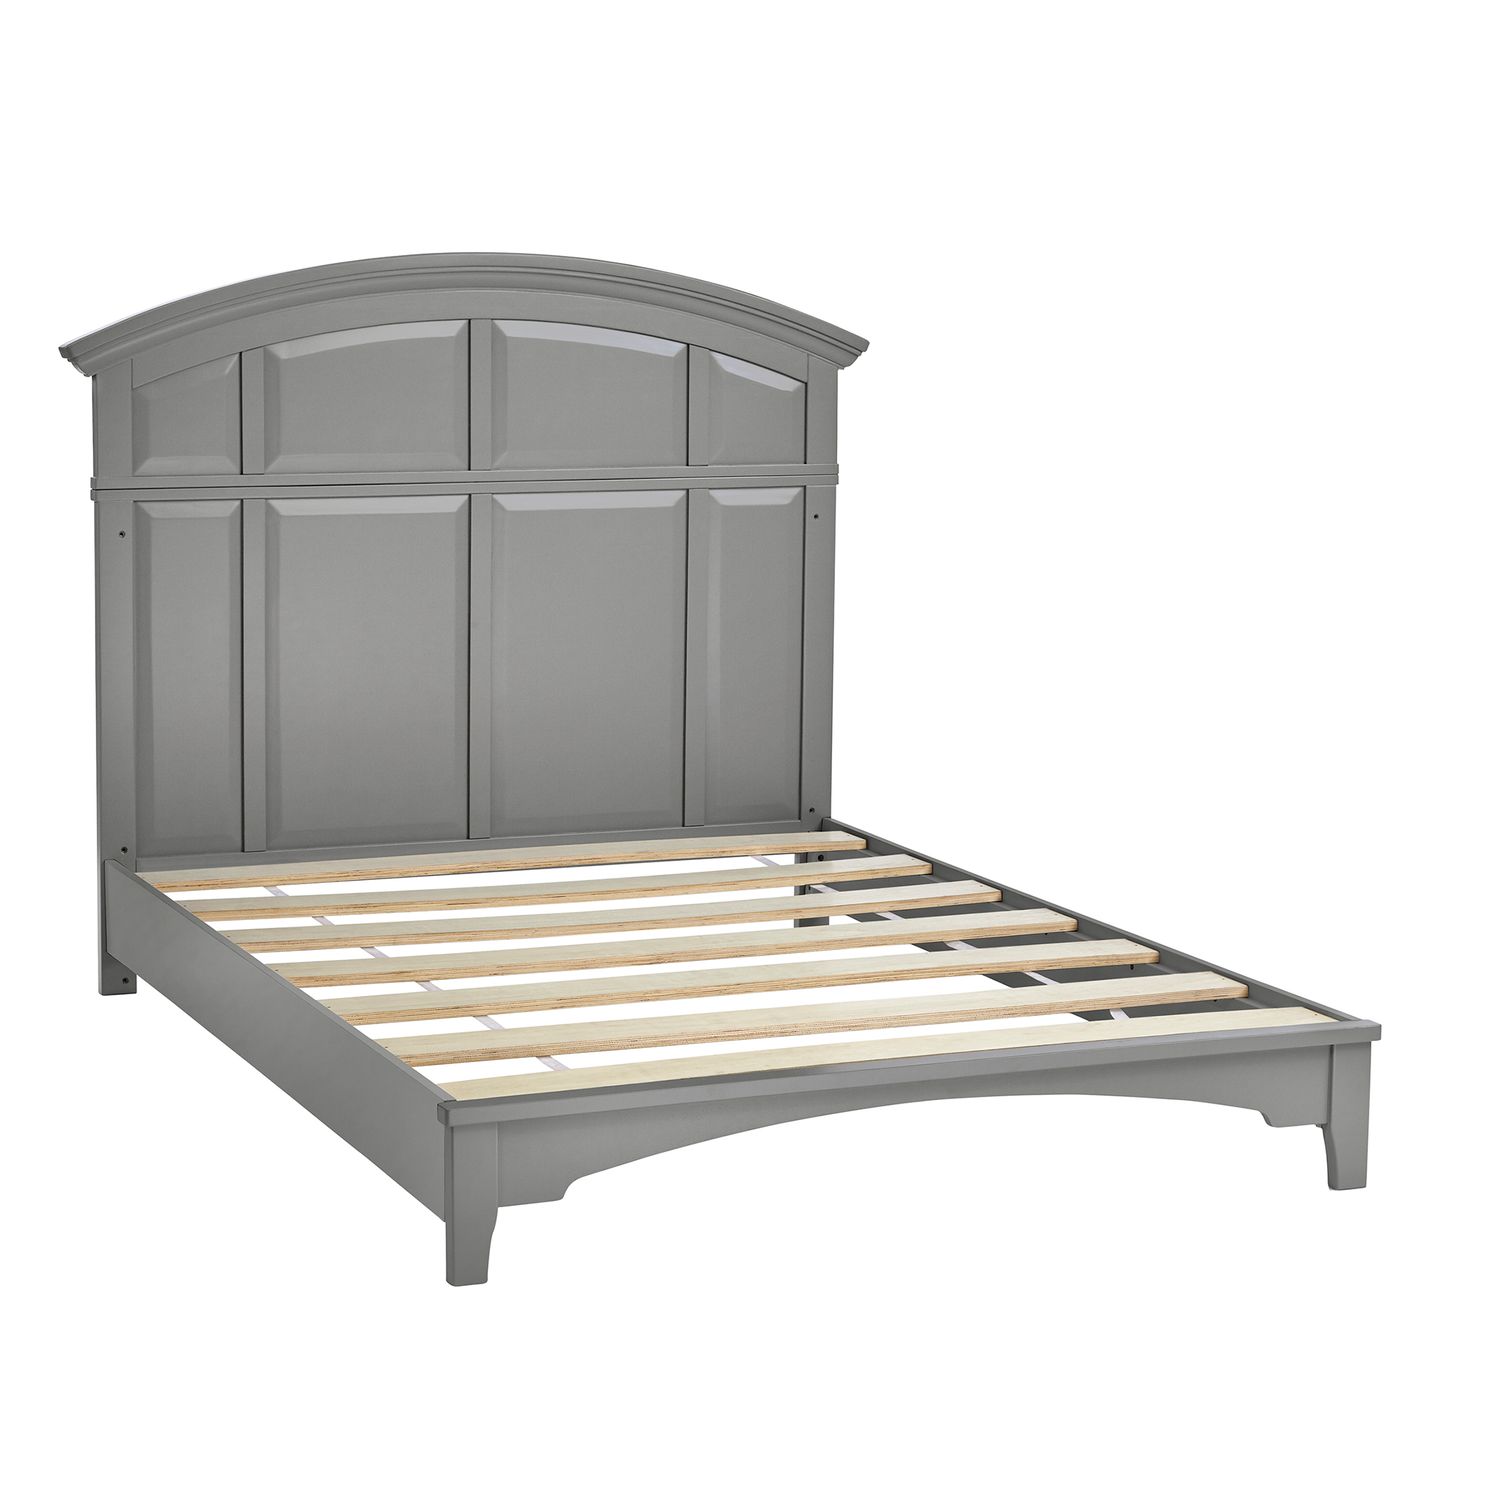 graco bed rails